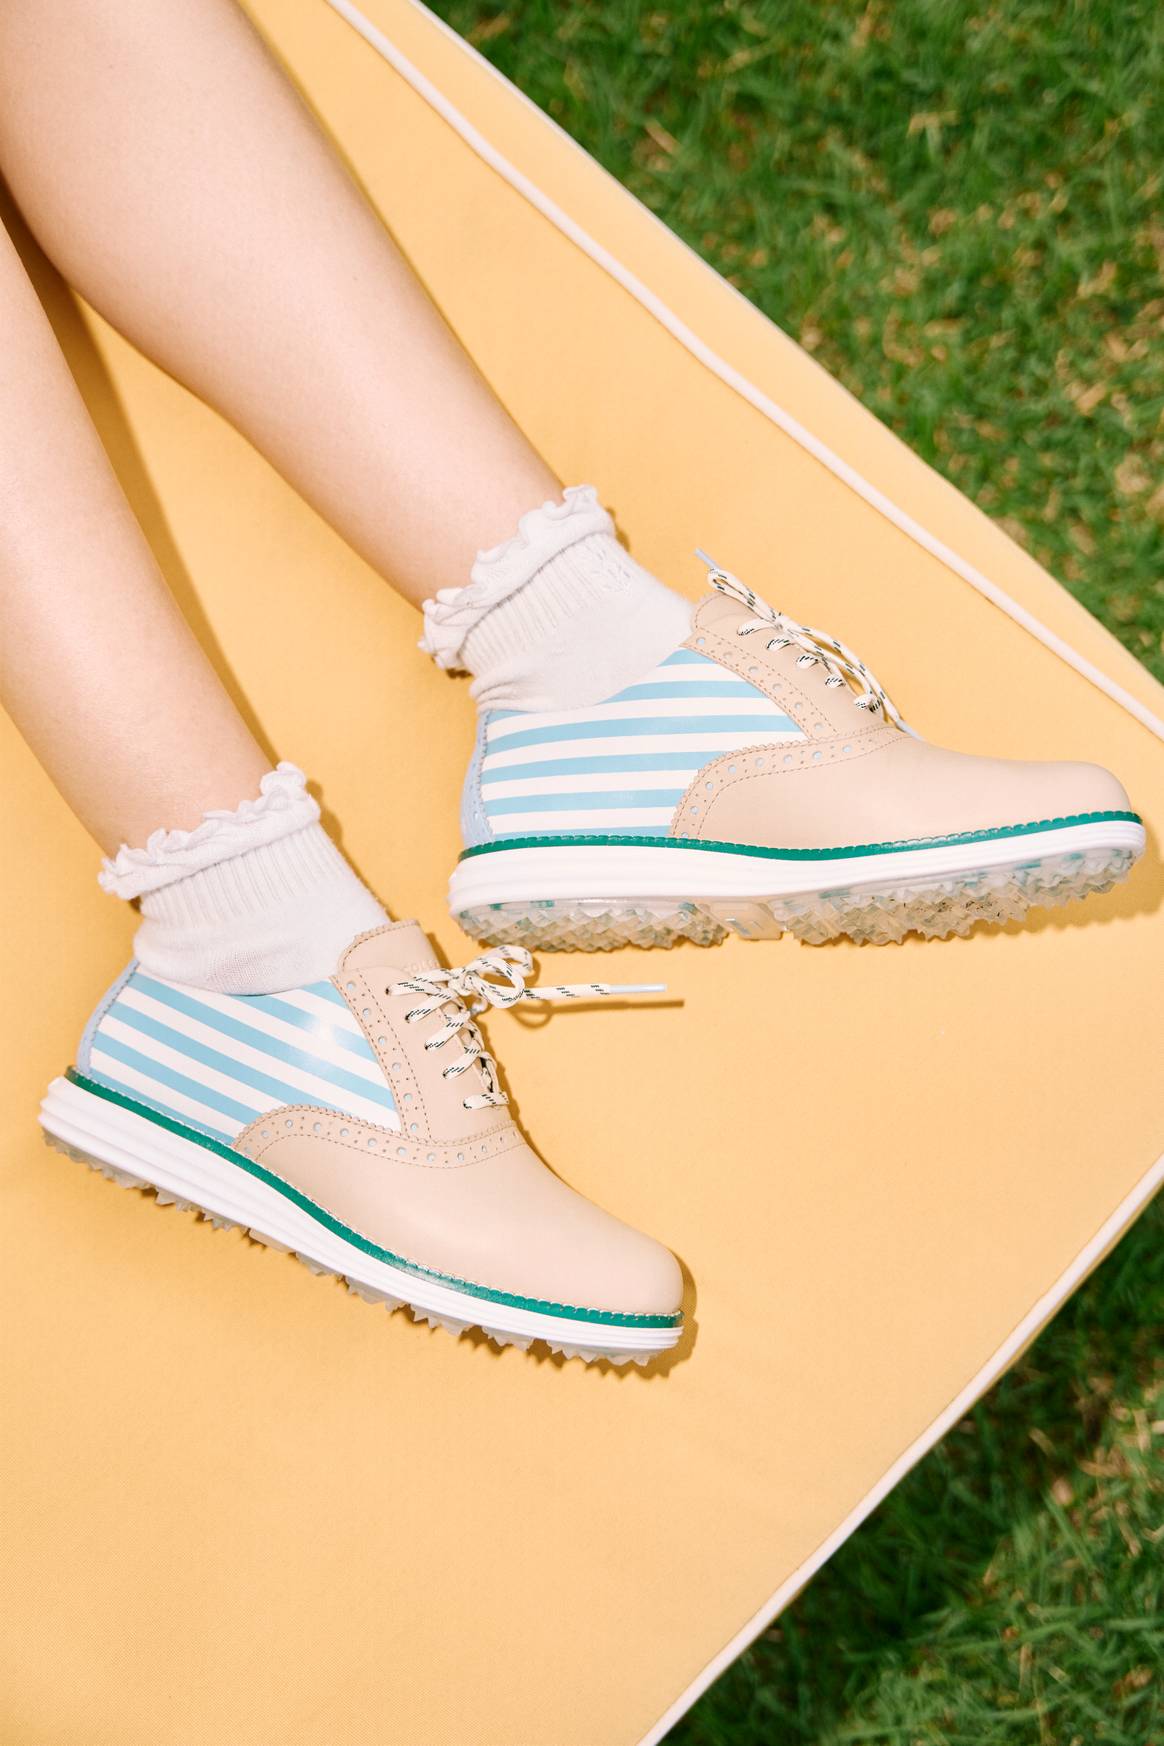 Credits: Image: Cole Haan; Cole Haan x Byrdie Golf Social Wear collection, ØriginalGrand Shortwing Golf Shoe